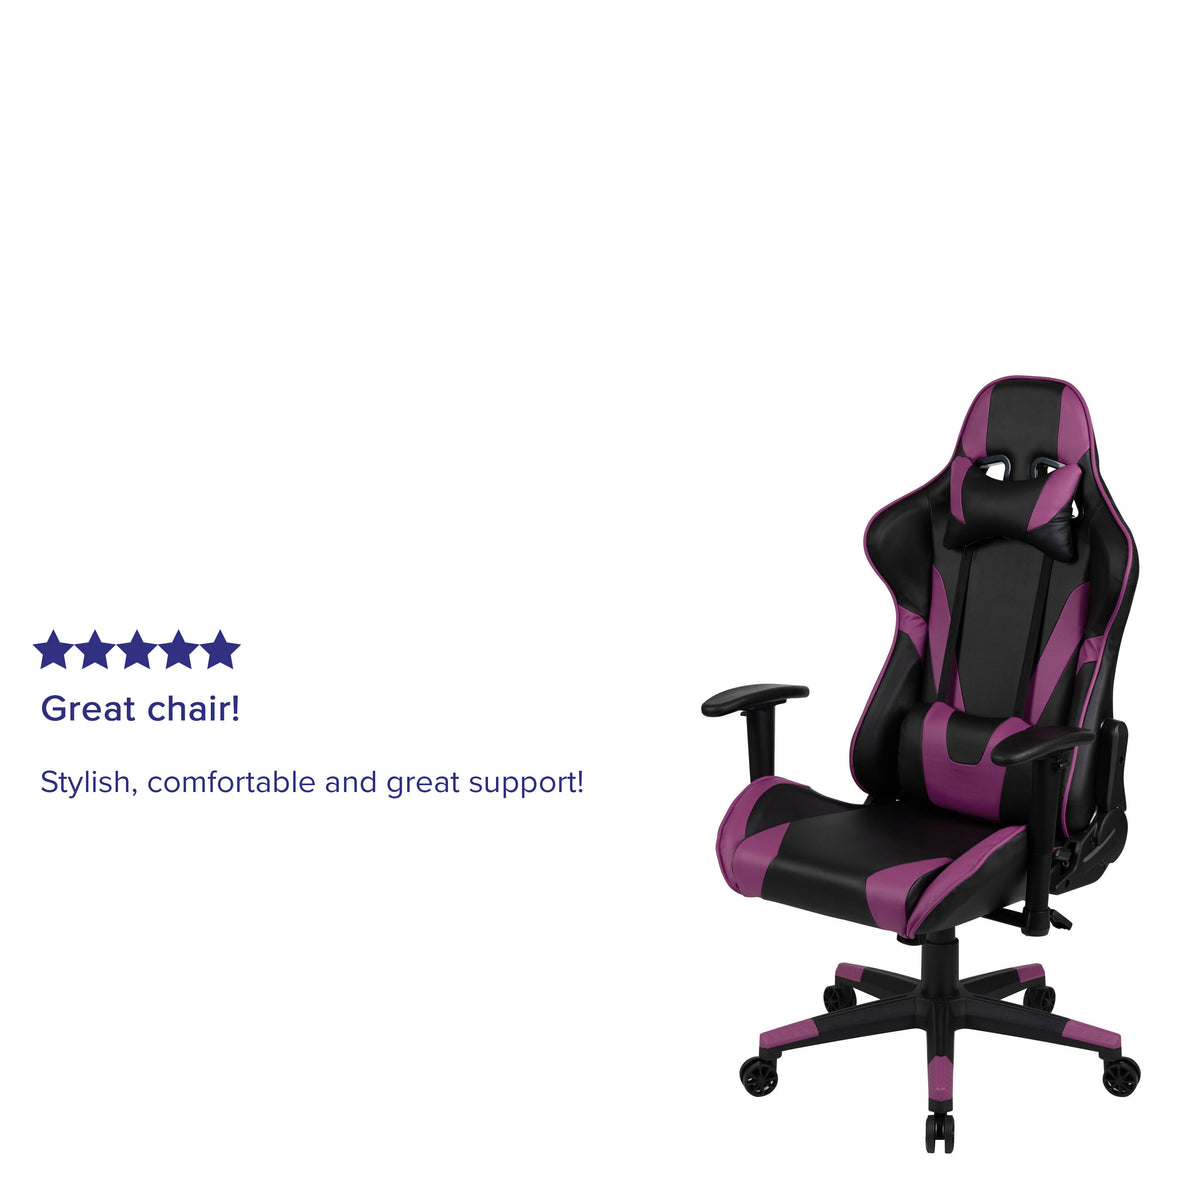 Purple |#| Racing Gaming Ergonomic Chair with Fully Reclining Back in Purple LeatherSoft